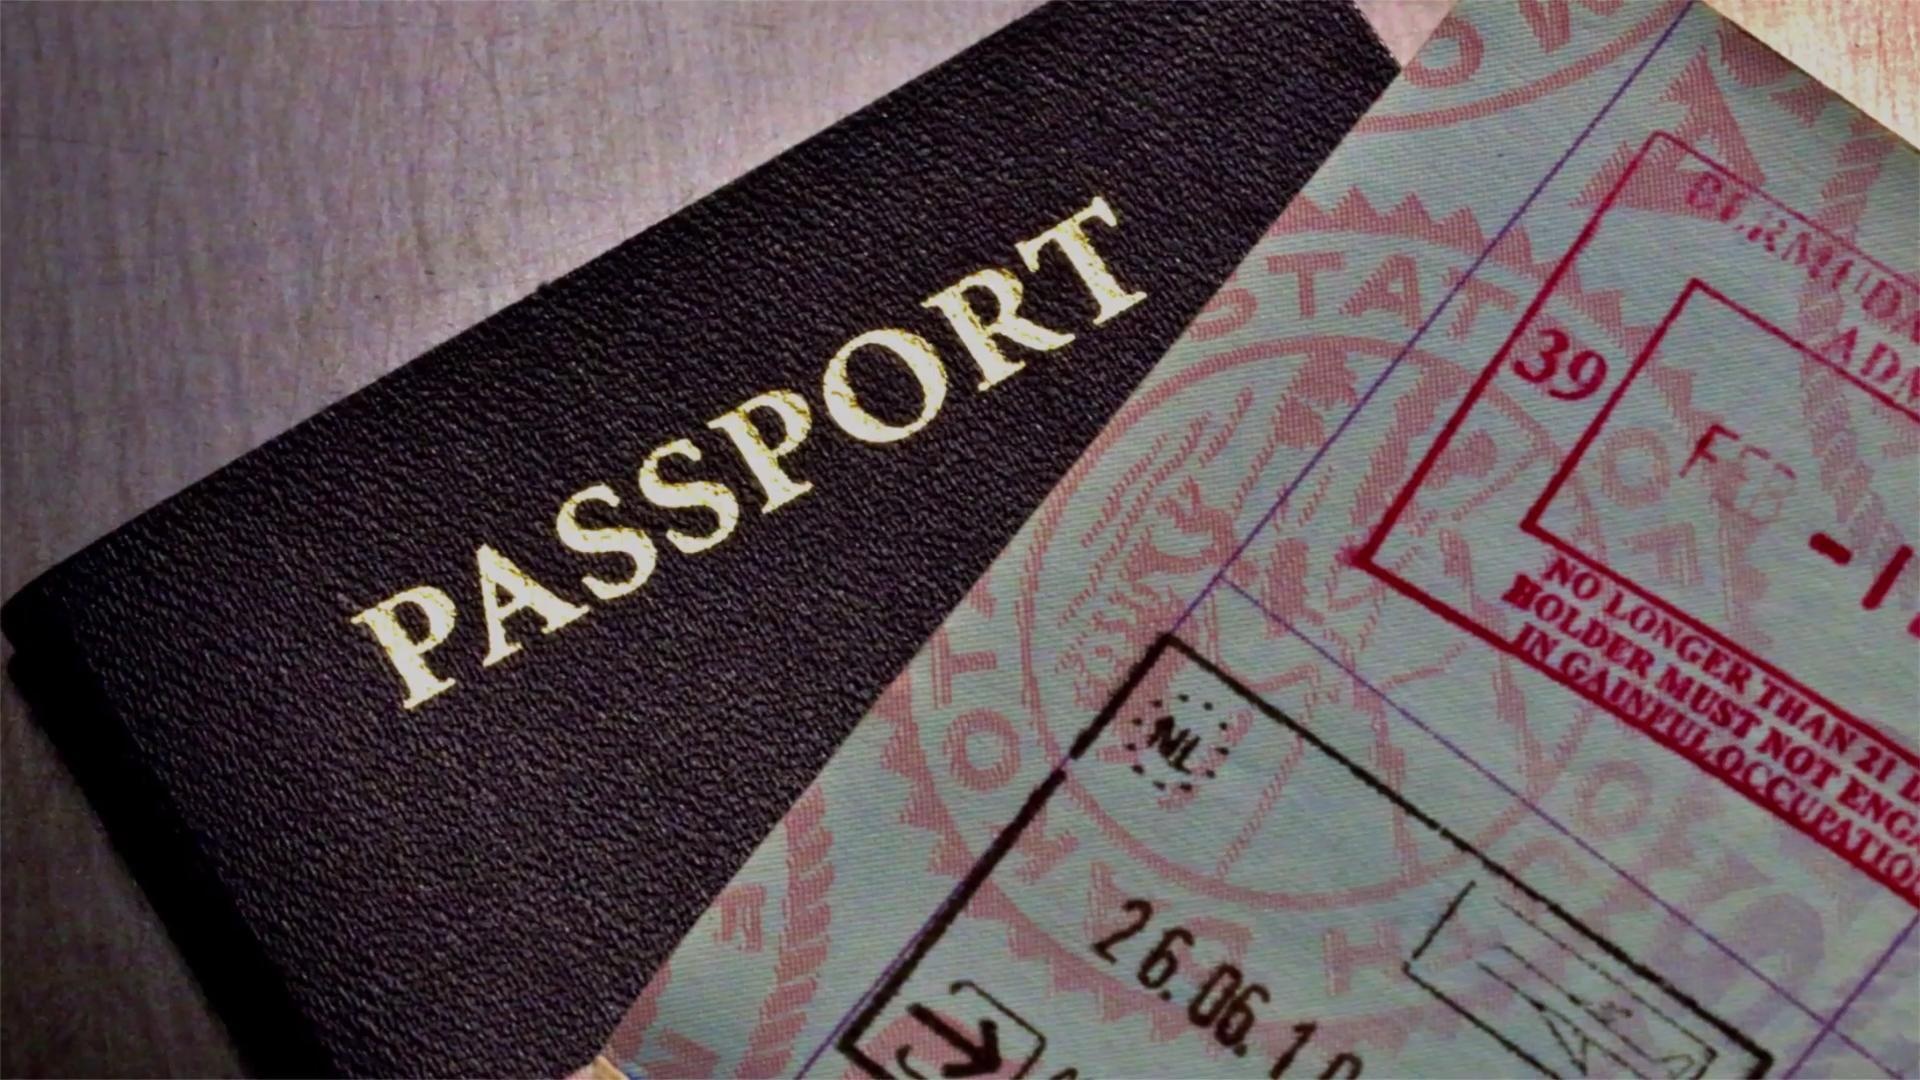 Travel Visa: Passport, Research type, for students doing fieldwork in the host country. 1920x1080 Full HD Wallpaper.